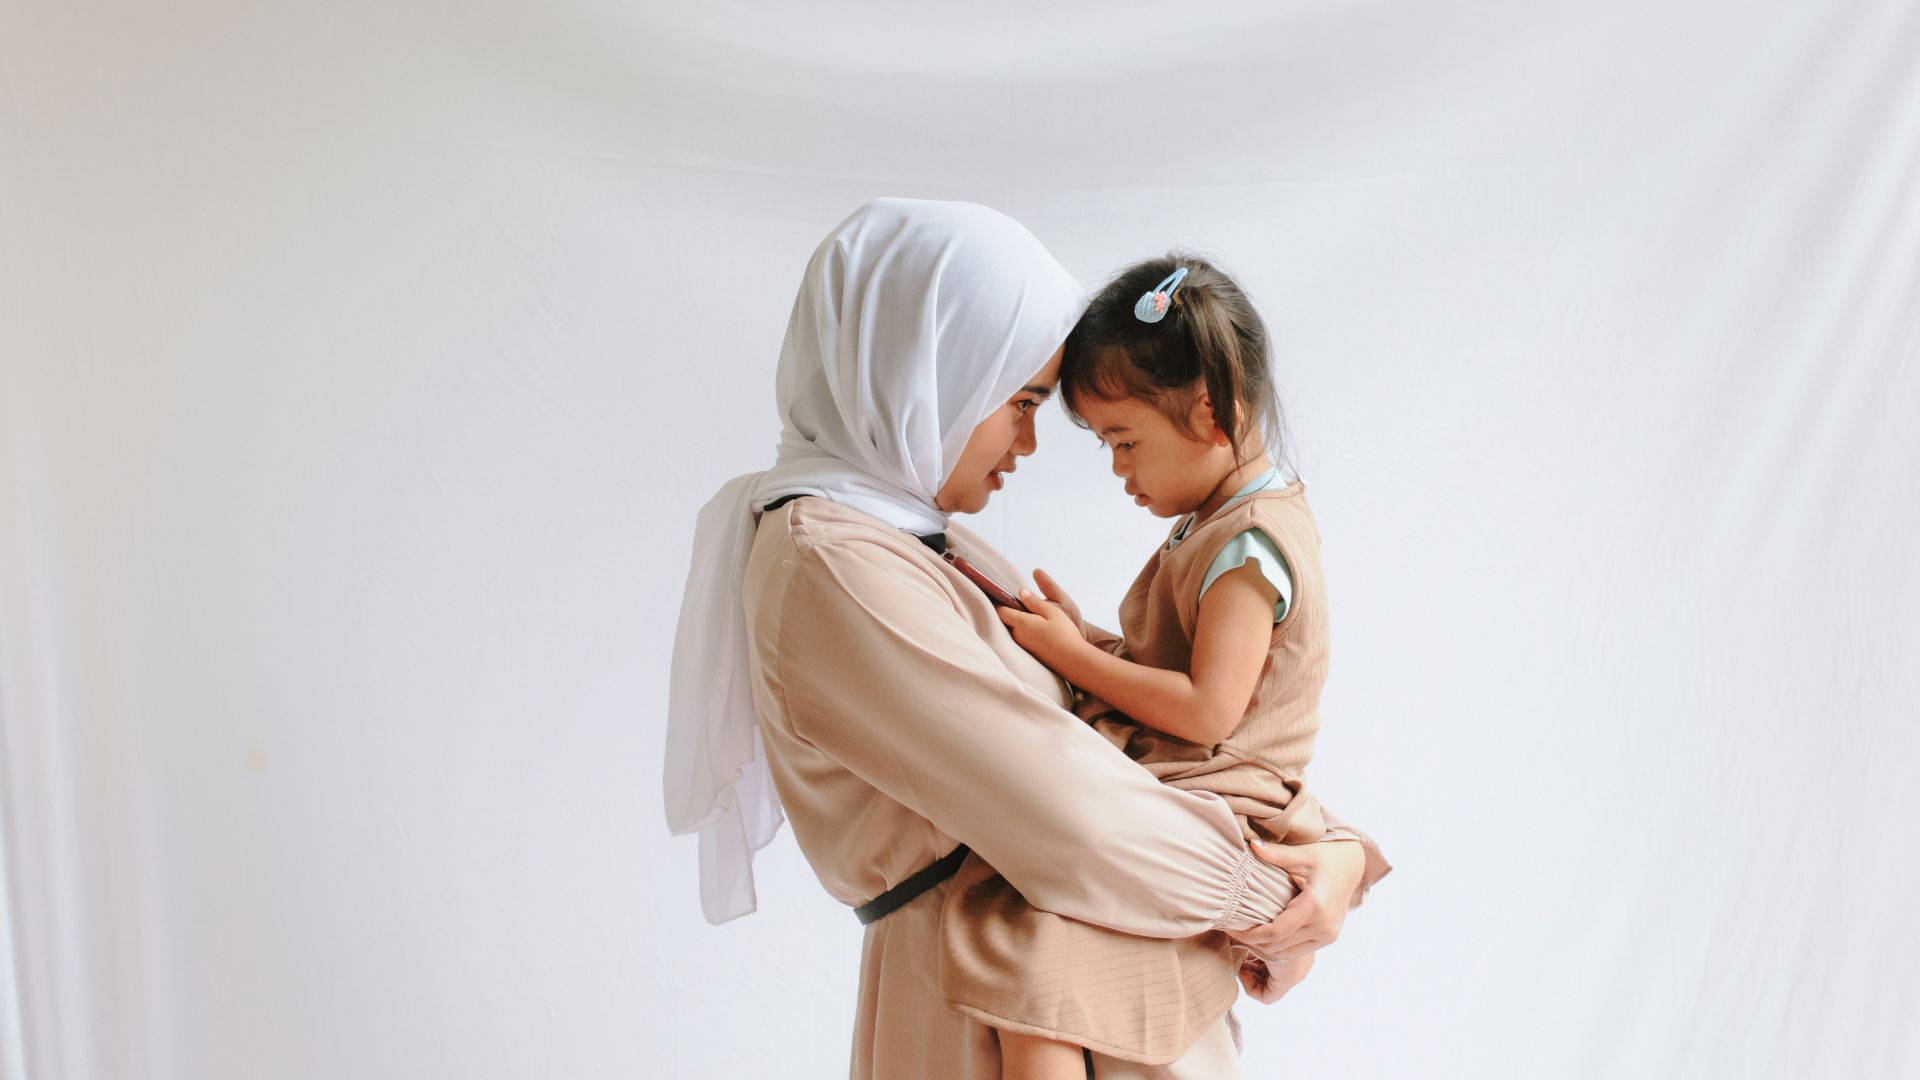 Caption: A Warm Embrace - Loving Muslim Mother Carrying Her Child Background